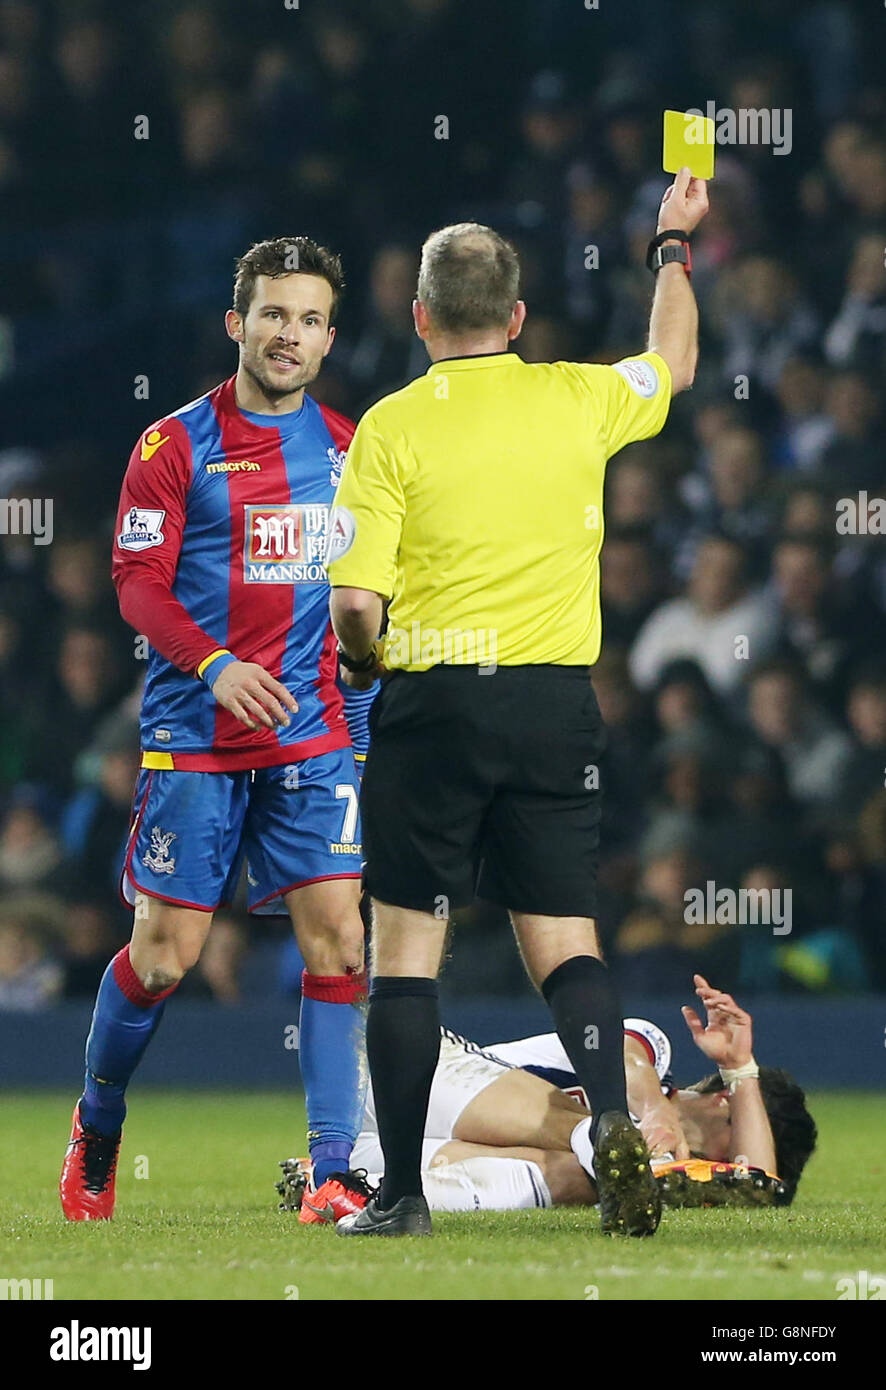 Crystal Palace's Yohan Cabaye receives a yellow card for a tackle on West Bromwich Albion's Claudio Yacob, who lies injured, during the Barclays Premier League match at The Hawthorns, West Bromwich. Stock Photo